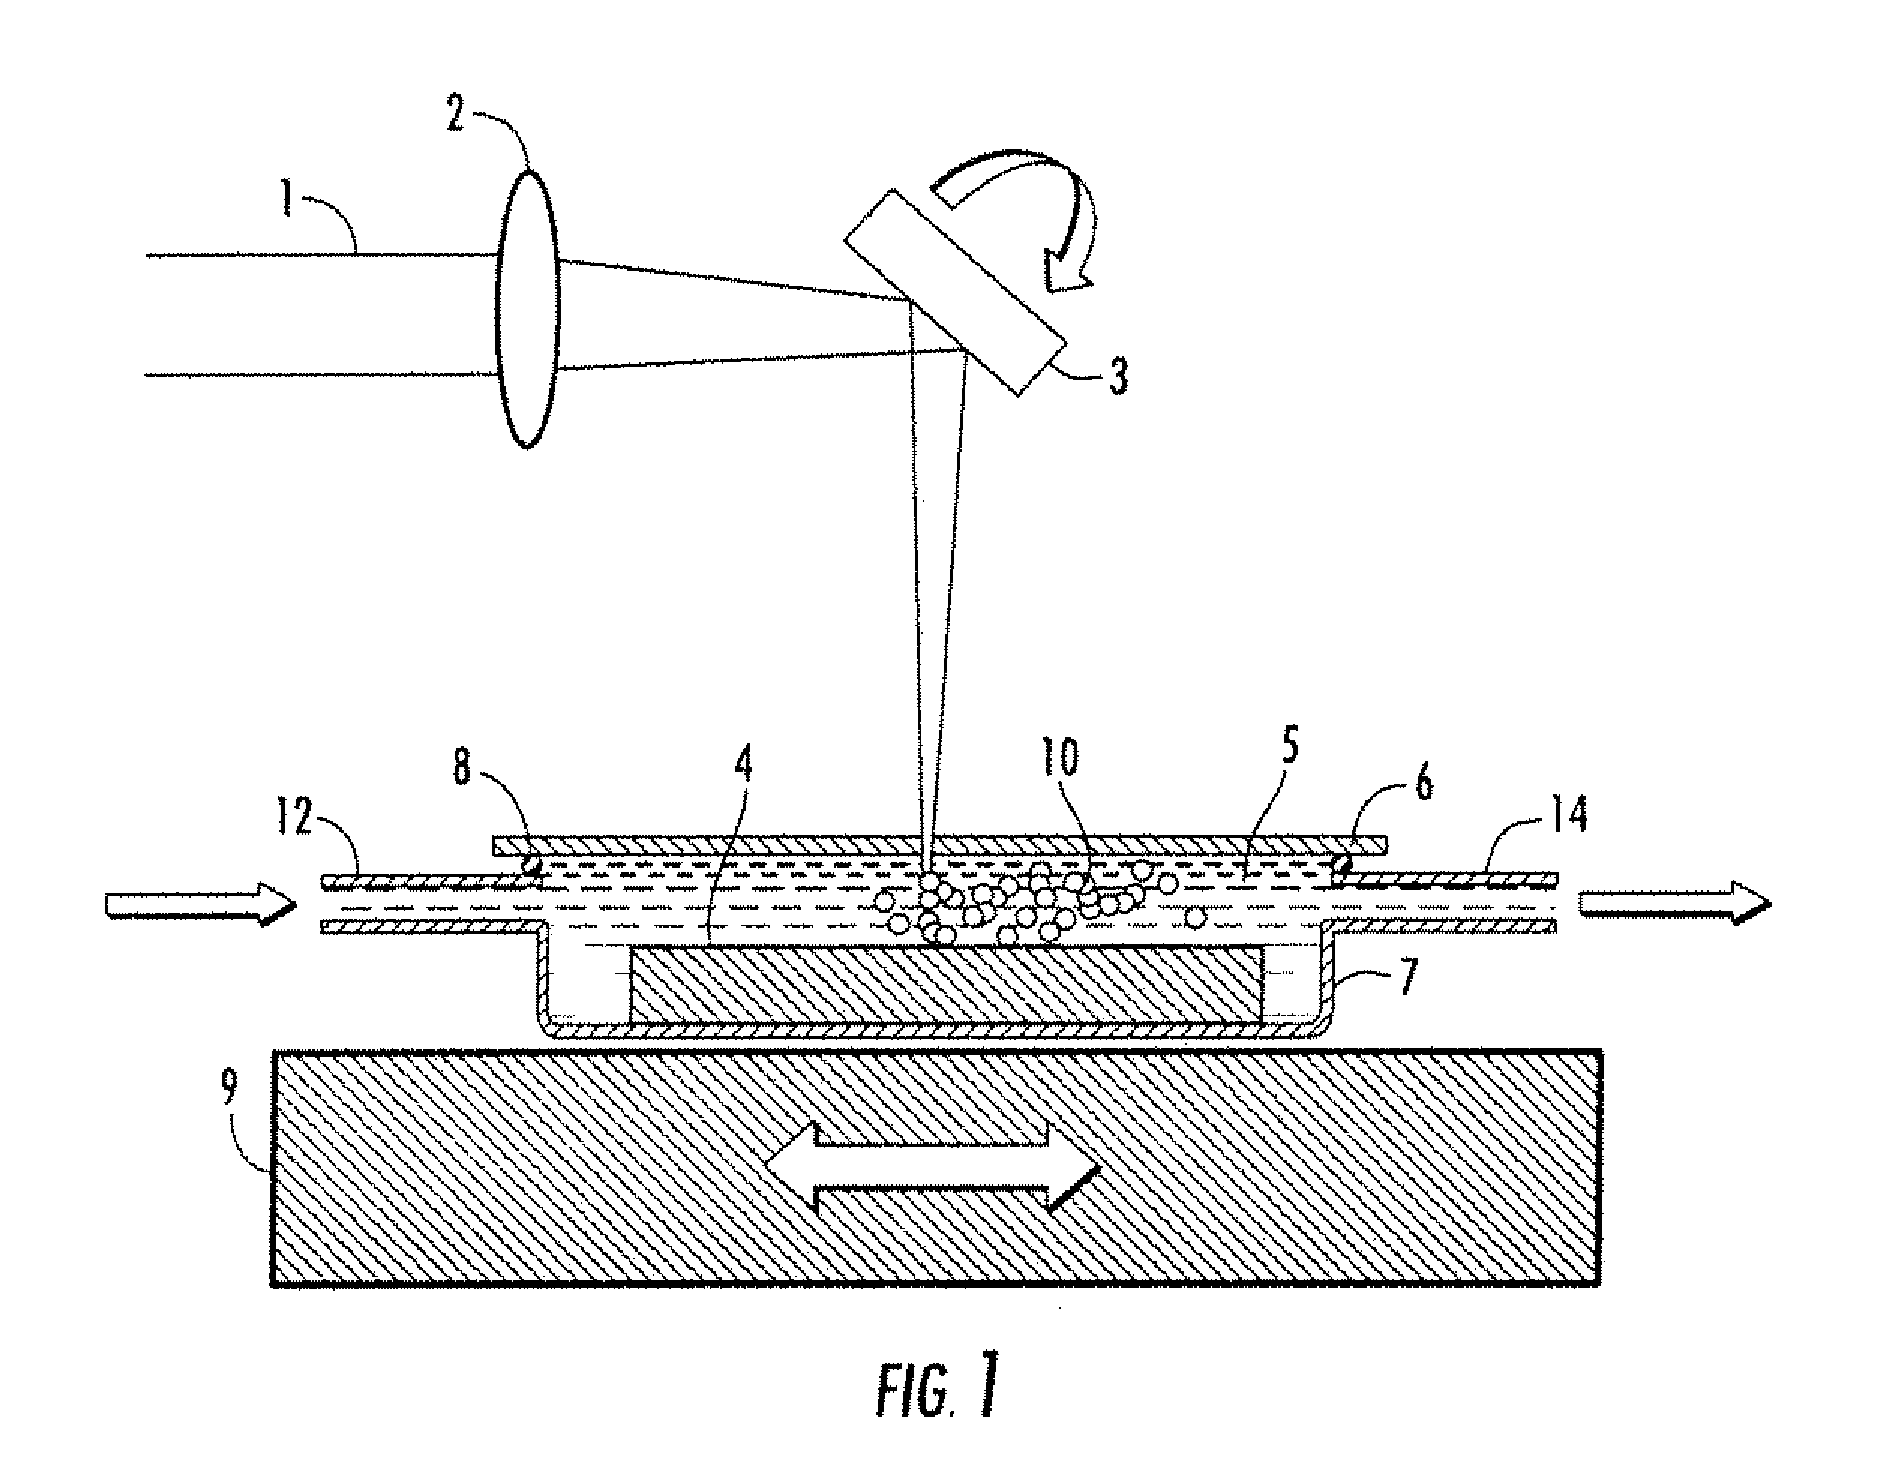 Method for producing nanoparticle solutions based on pulsed laser ablation for fabrication of thin film solar cells